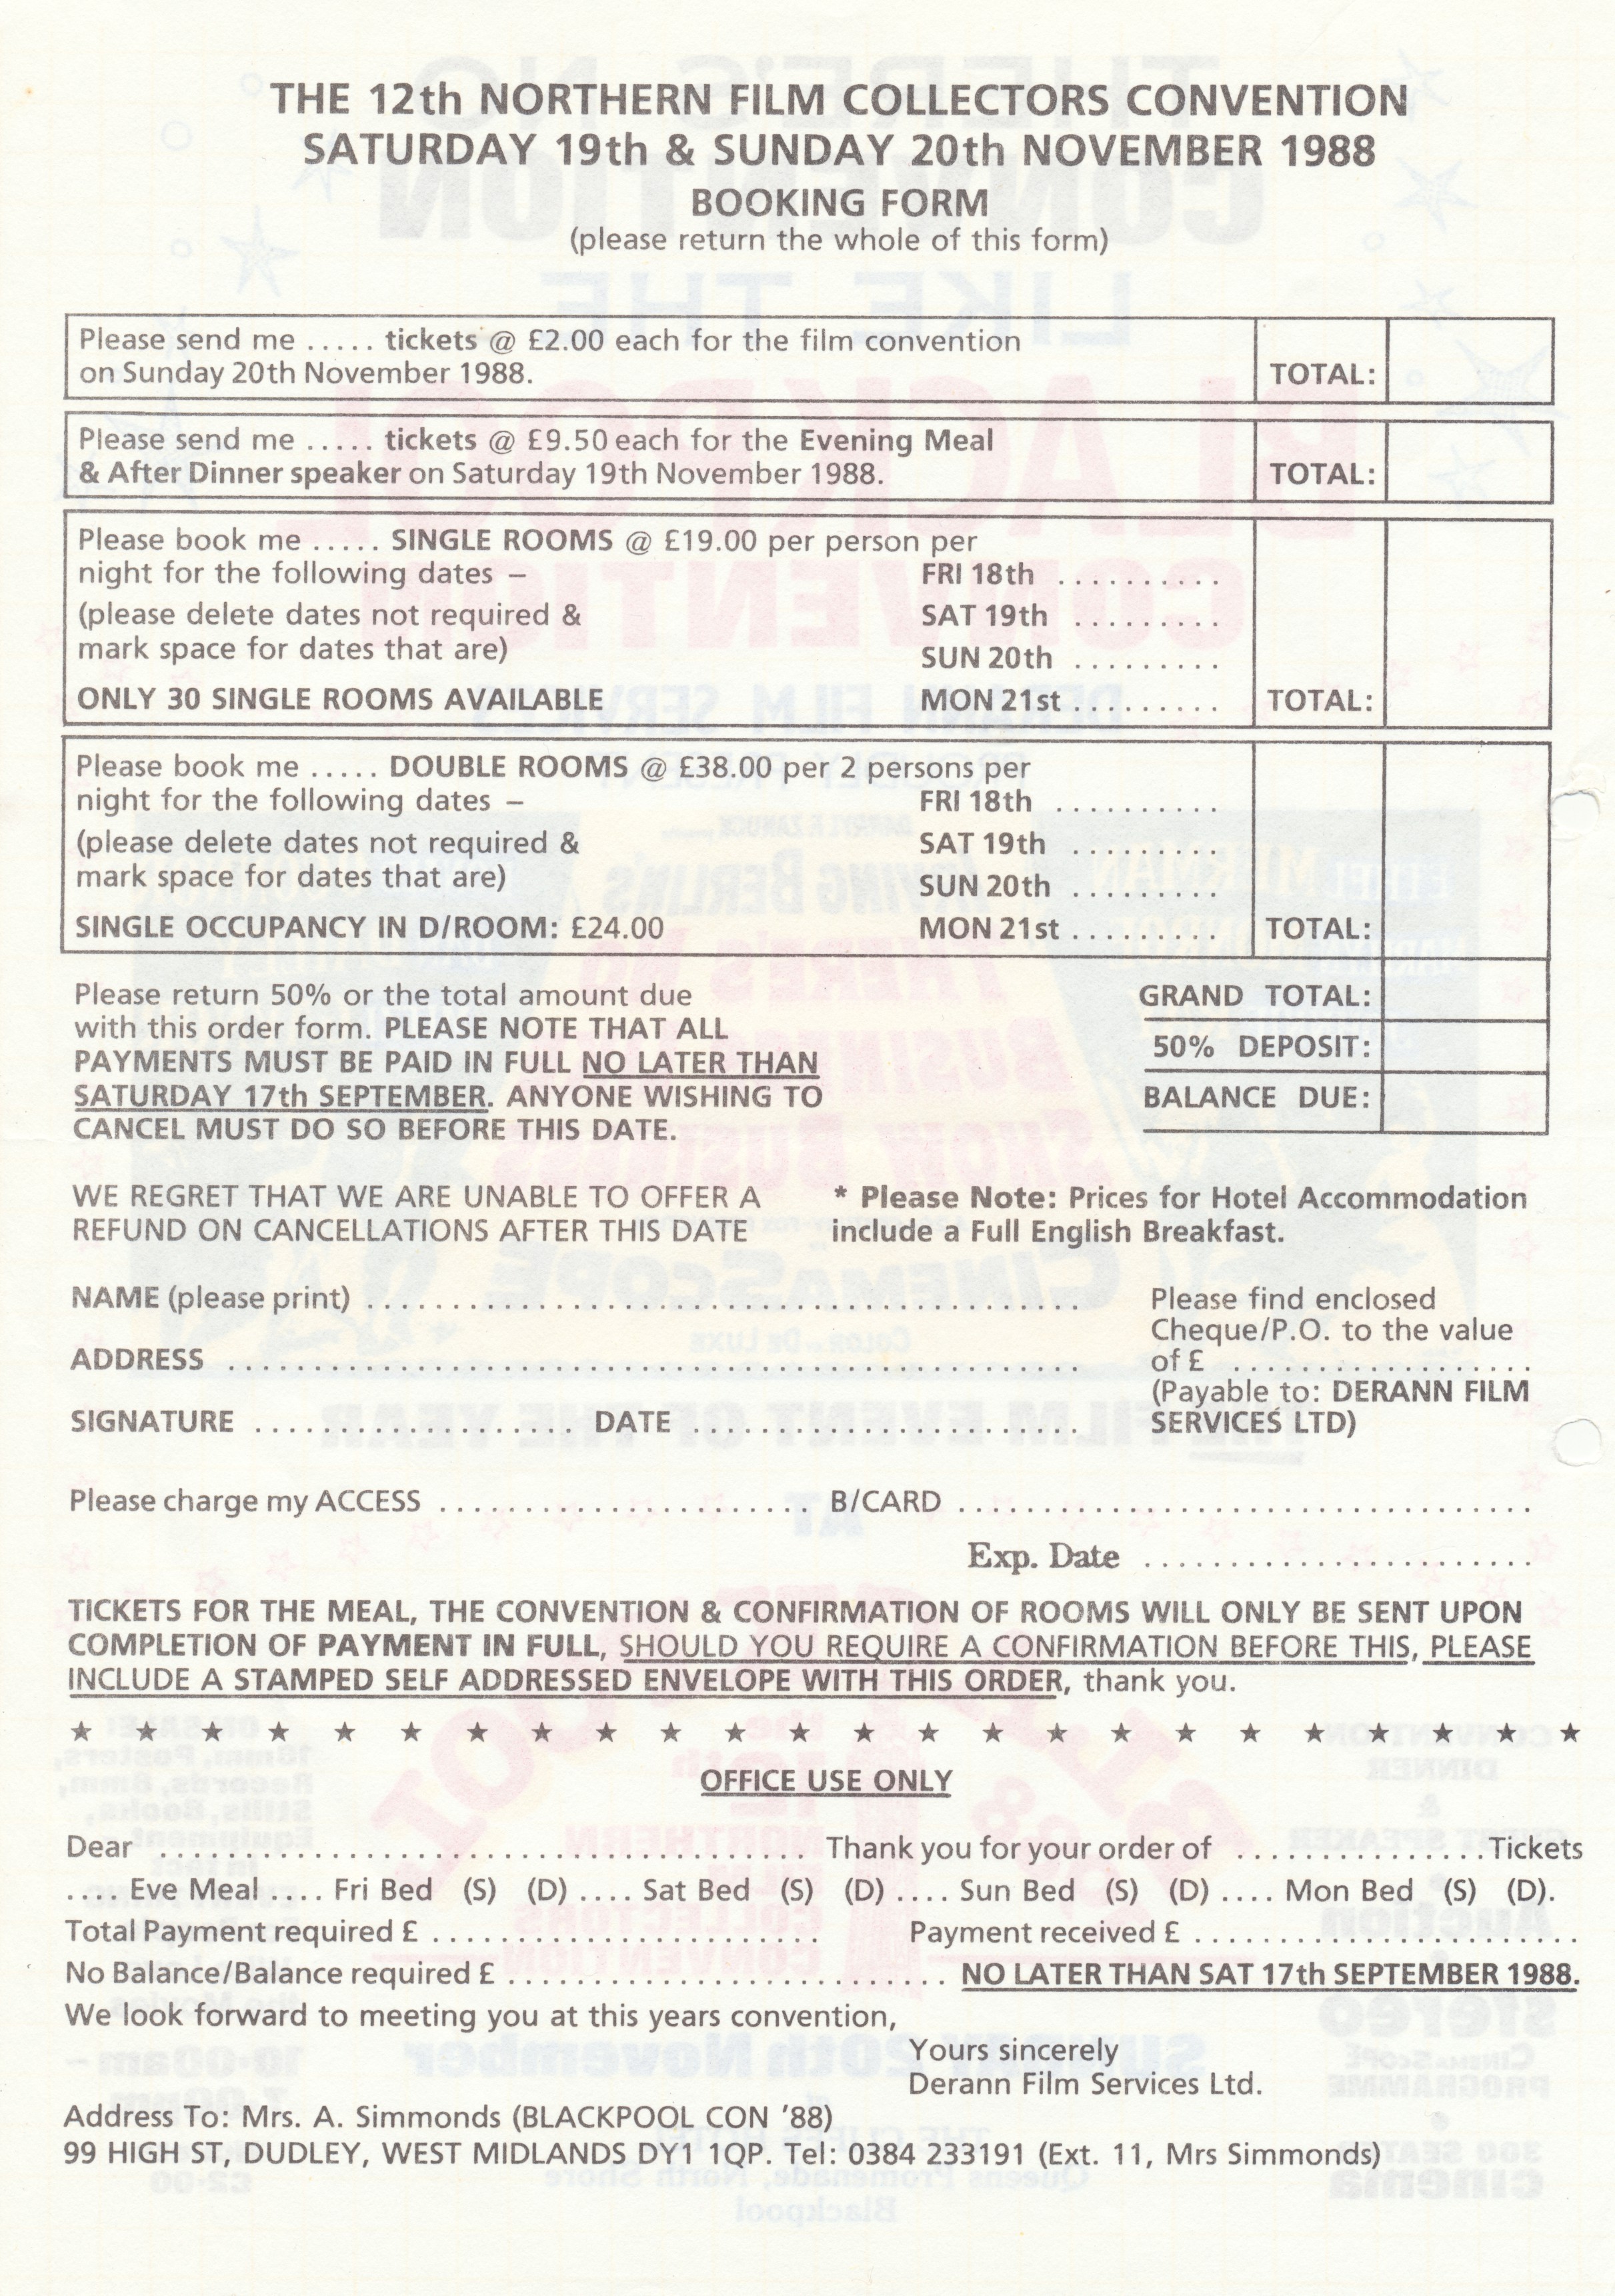 1988 Convention booking form